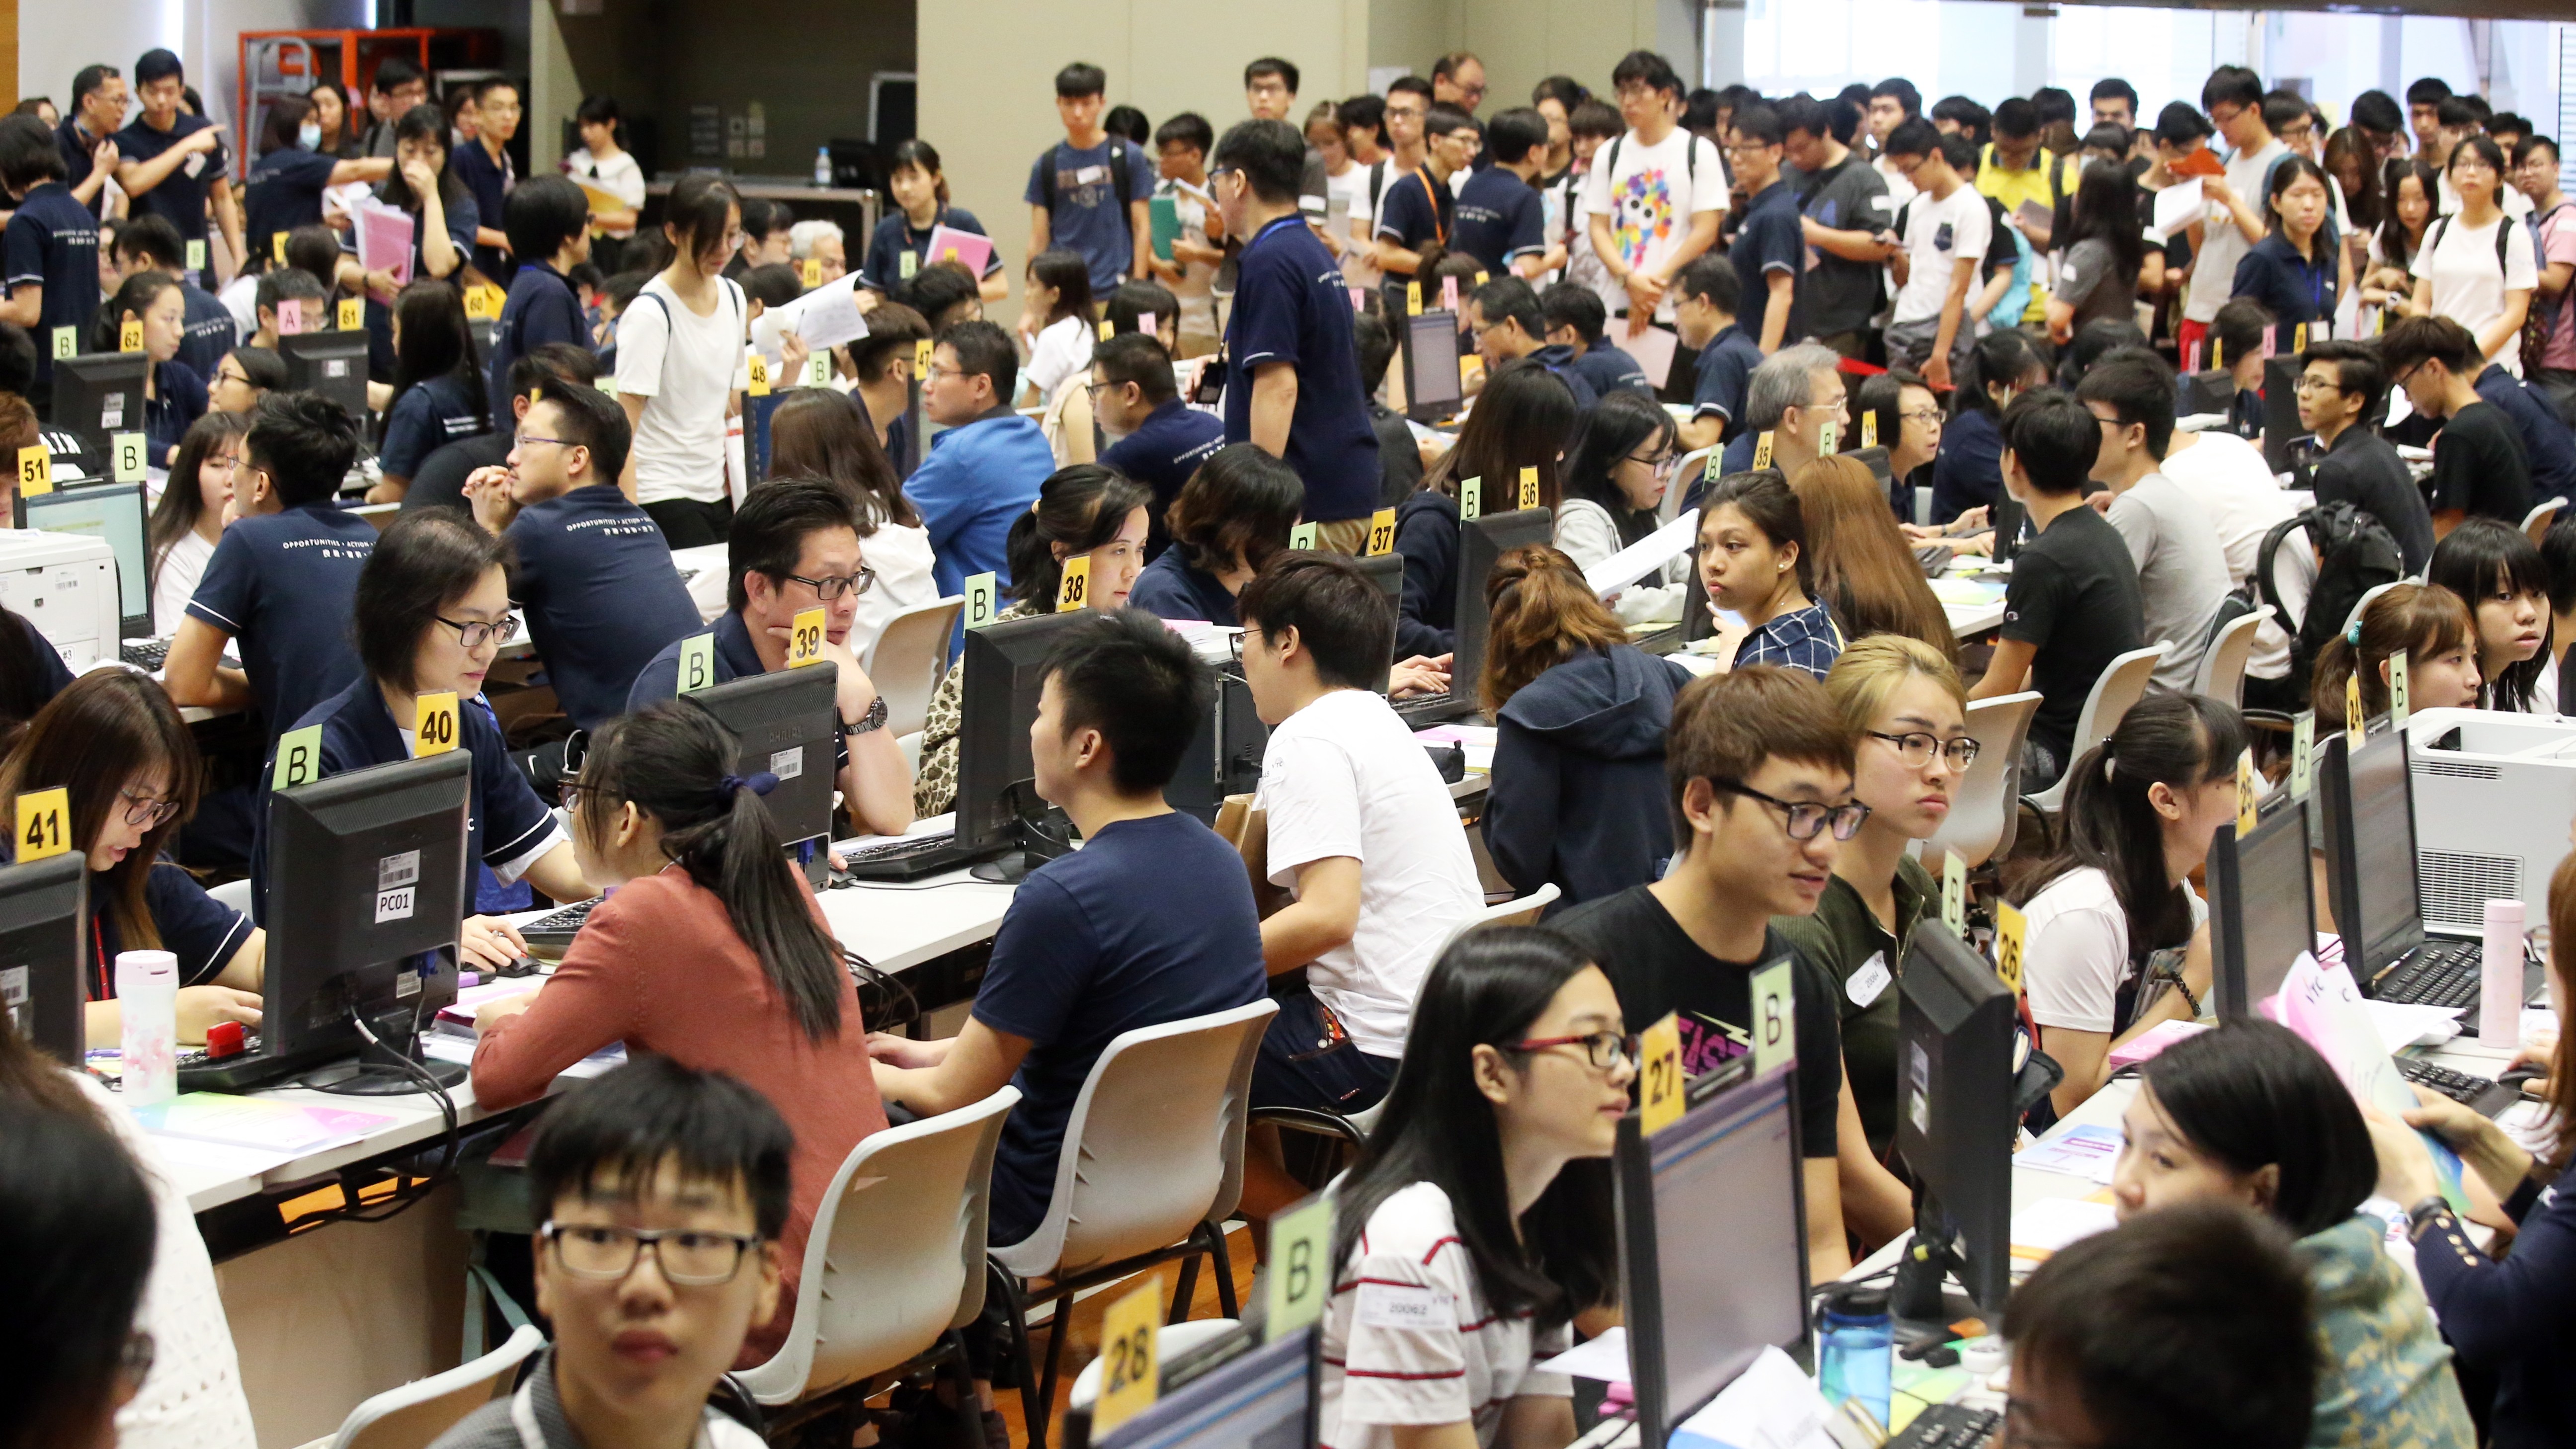 DSE students applying for self-financing degrees in Cheung Sha Wan on Wednesday. Photo: K. Y. Cheng